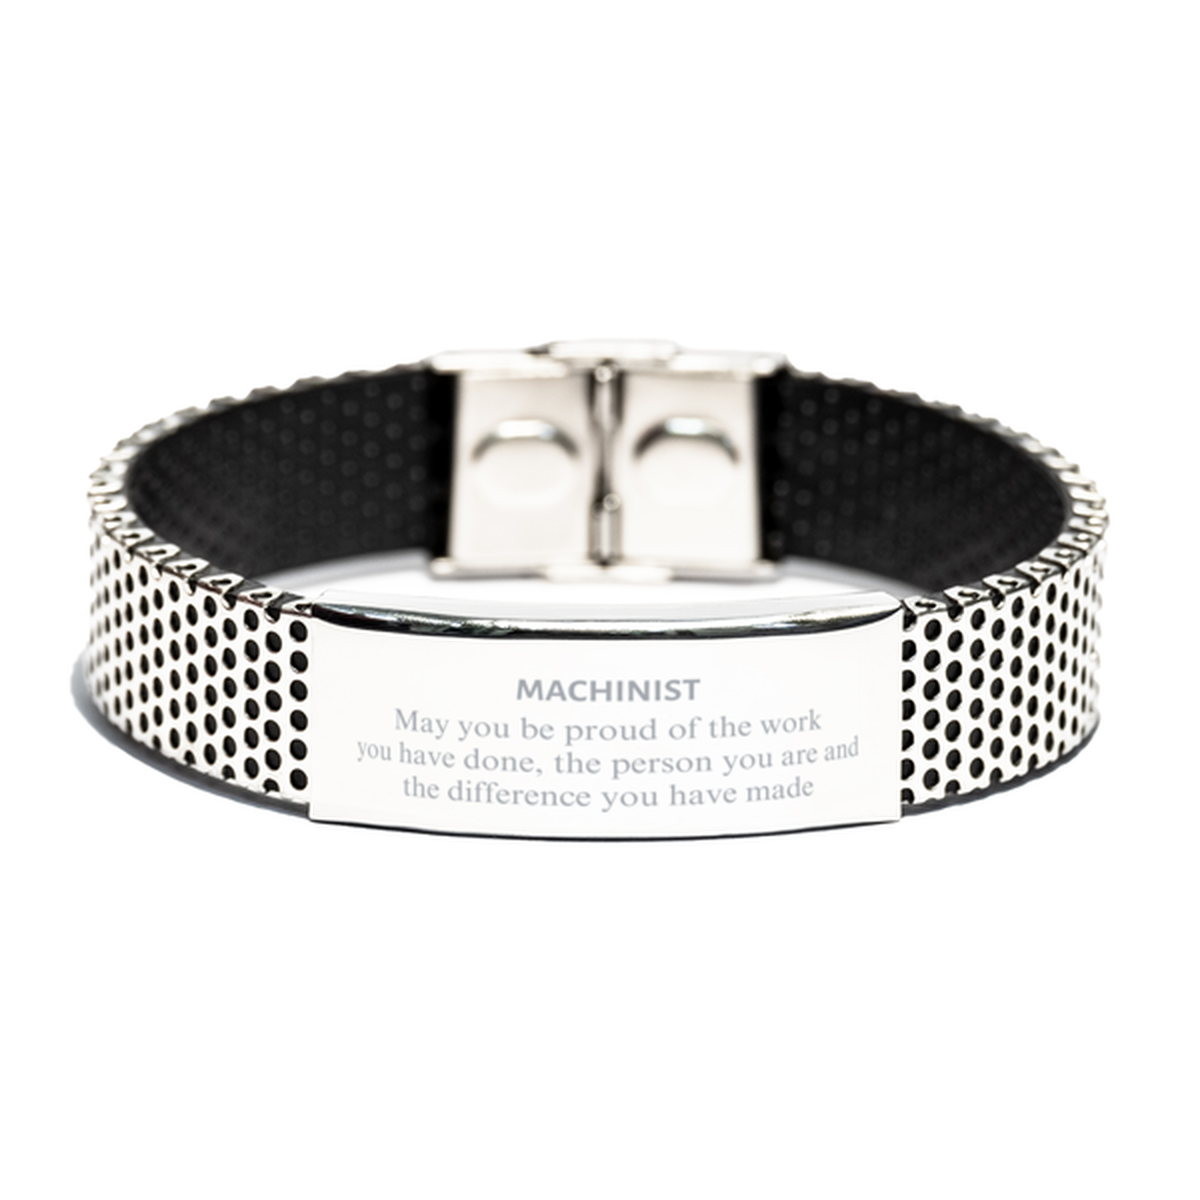 Machinist May you be proud of the work you have done, Retirement Machinist Stainless Steel Bracelet for Colleague Appreciation Gifts Amazing for Machinist